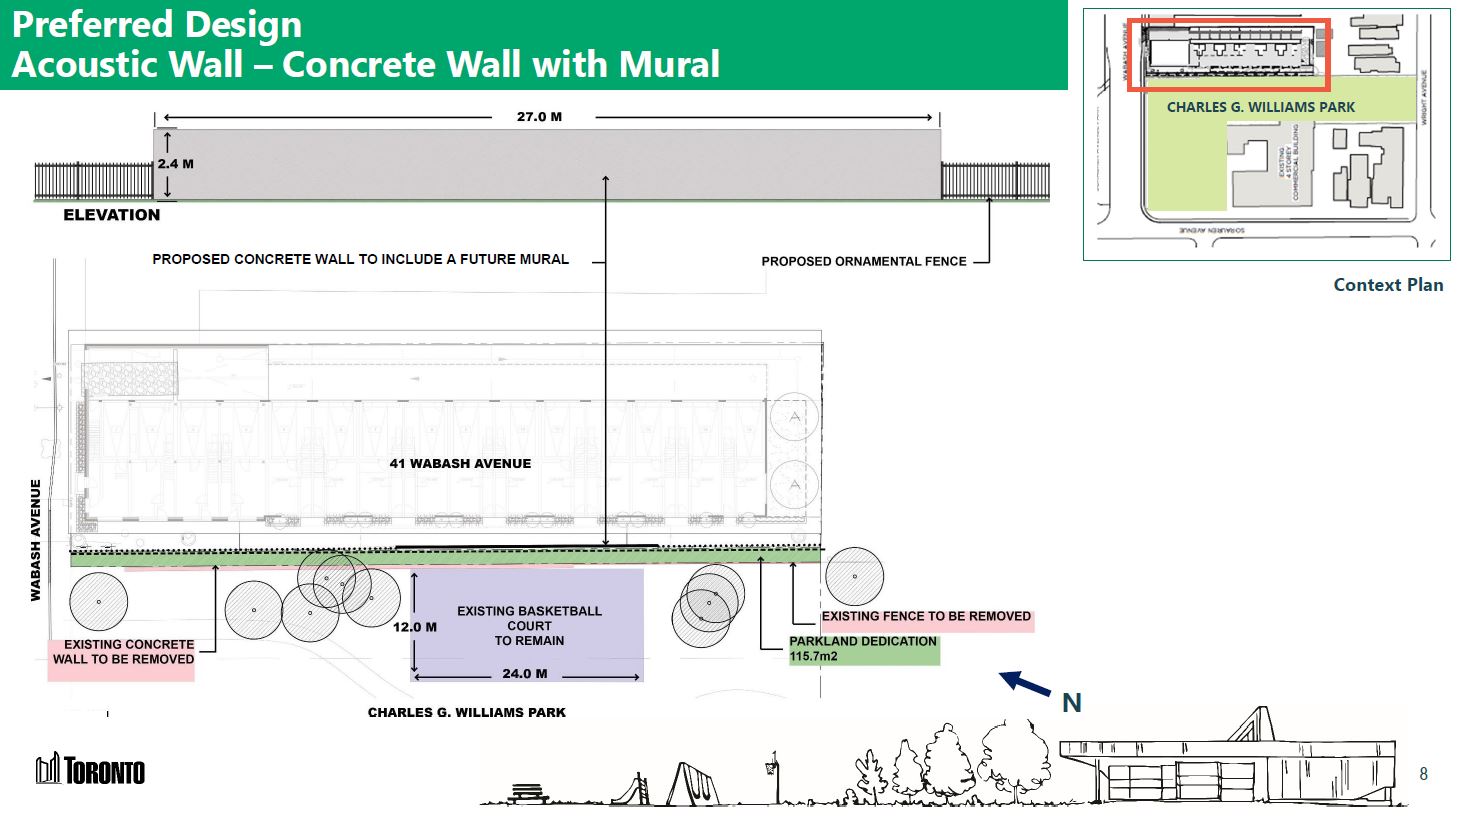 The Preferred Wall Design for the park expansion, which will include removing the existing concrete wall and replacing with a 27 metre concrete wall on the north-east side of the park. The image indicates the elevation of the wall is 2.4 metres high, and that the existing fence will also be removed